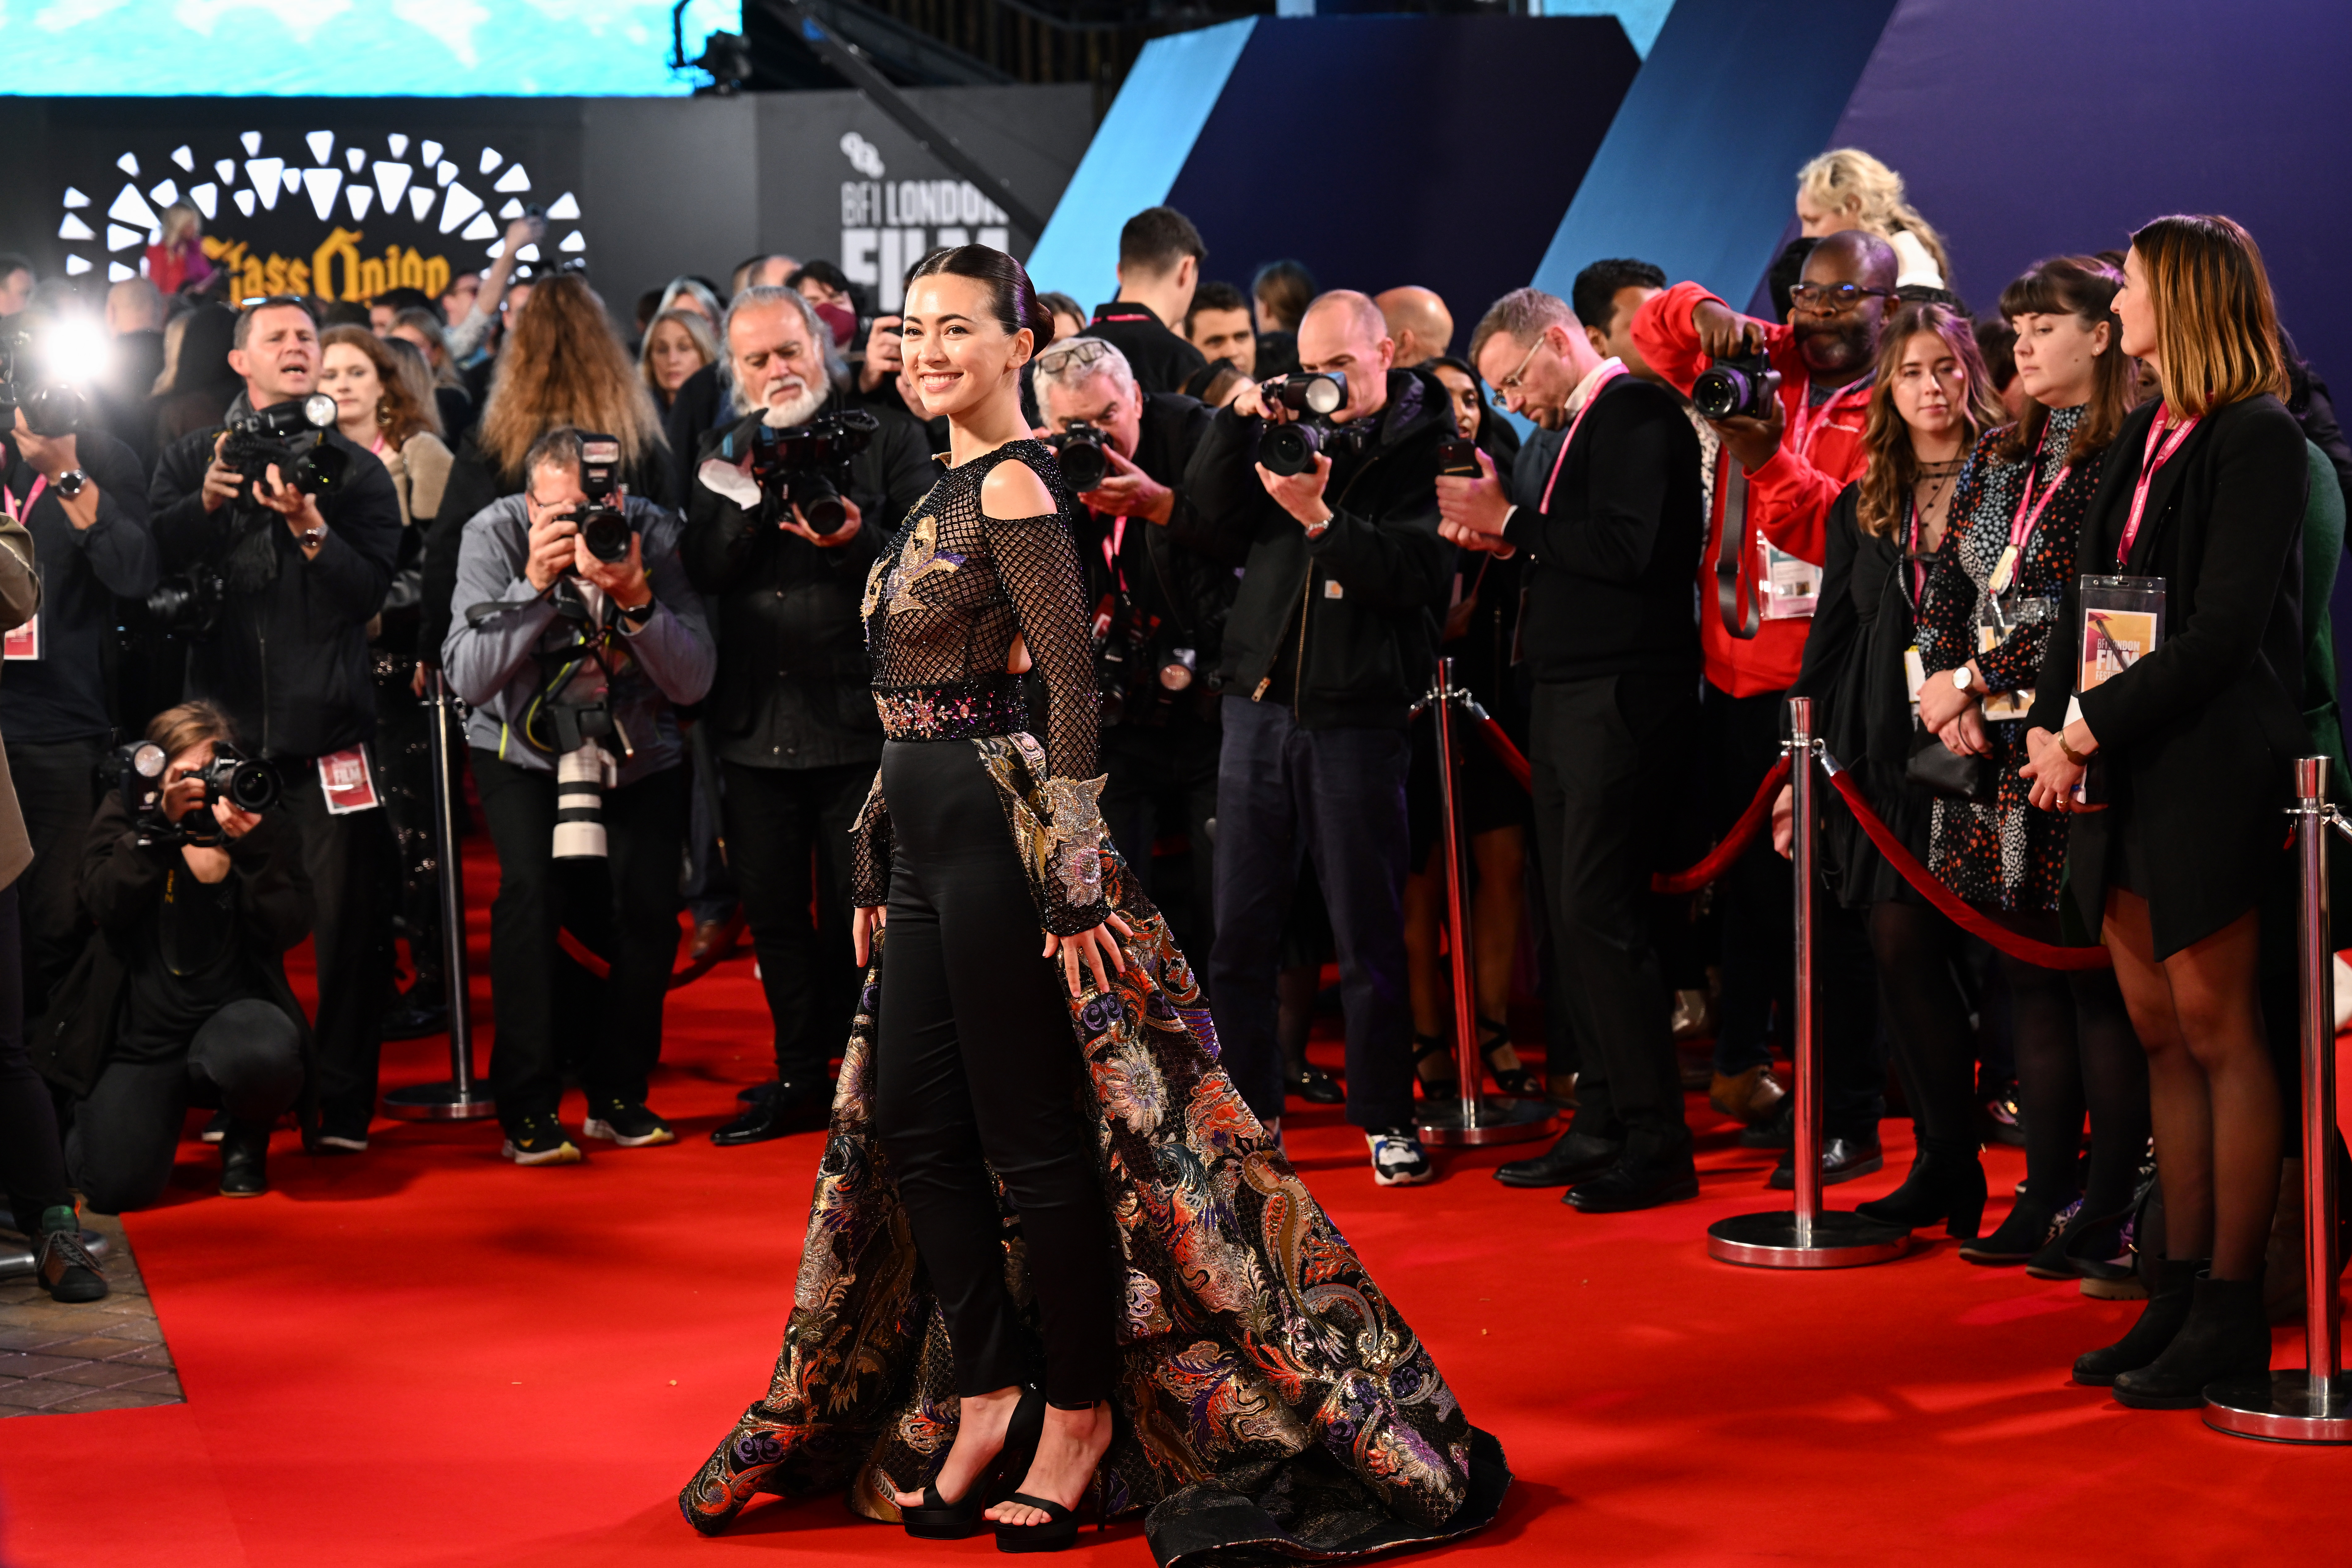 Jessica Henwick attends the "Glass Onion: A Knives Out Mystery" European Premiere and Closing Night Gala during the 66th BFI London Film Festival at The Royal Festival Hall on October 16, 2022 in London, England.  